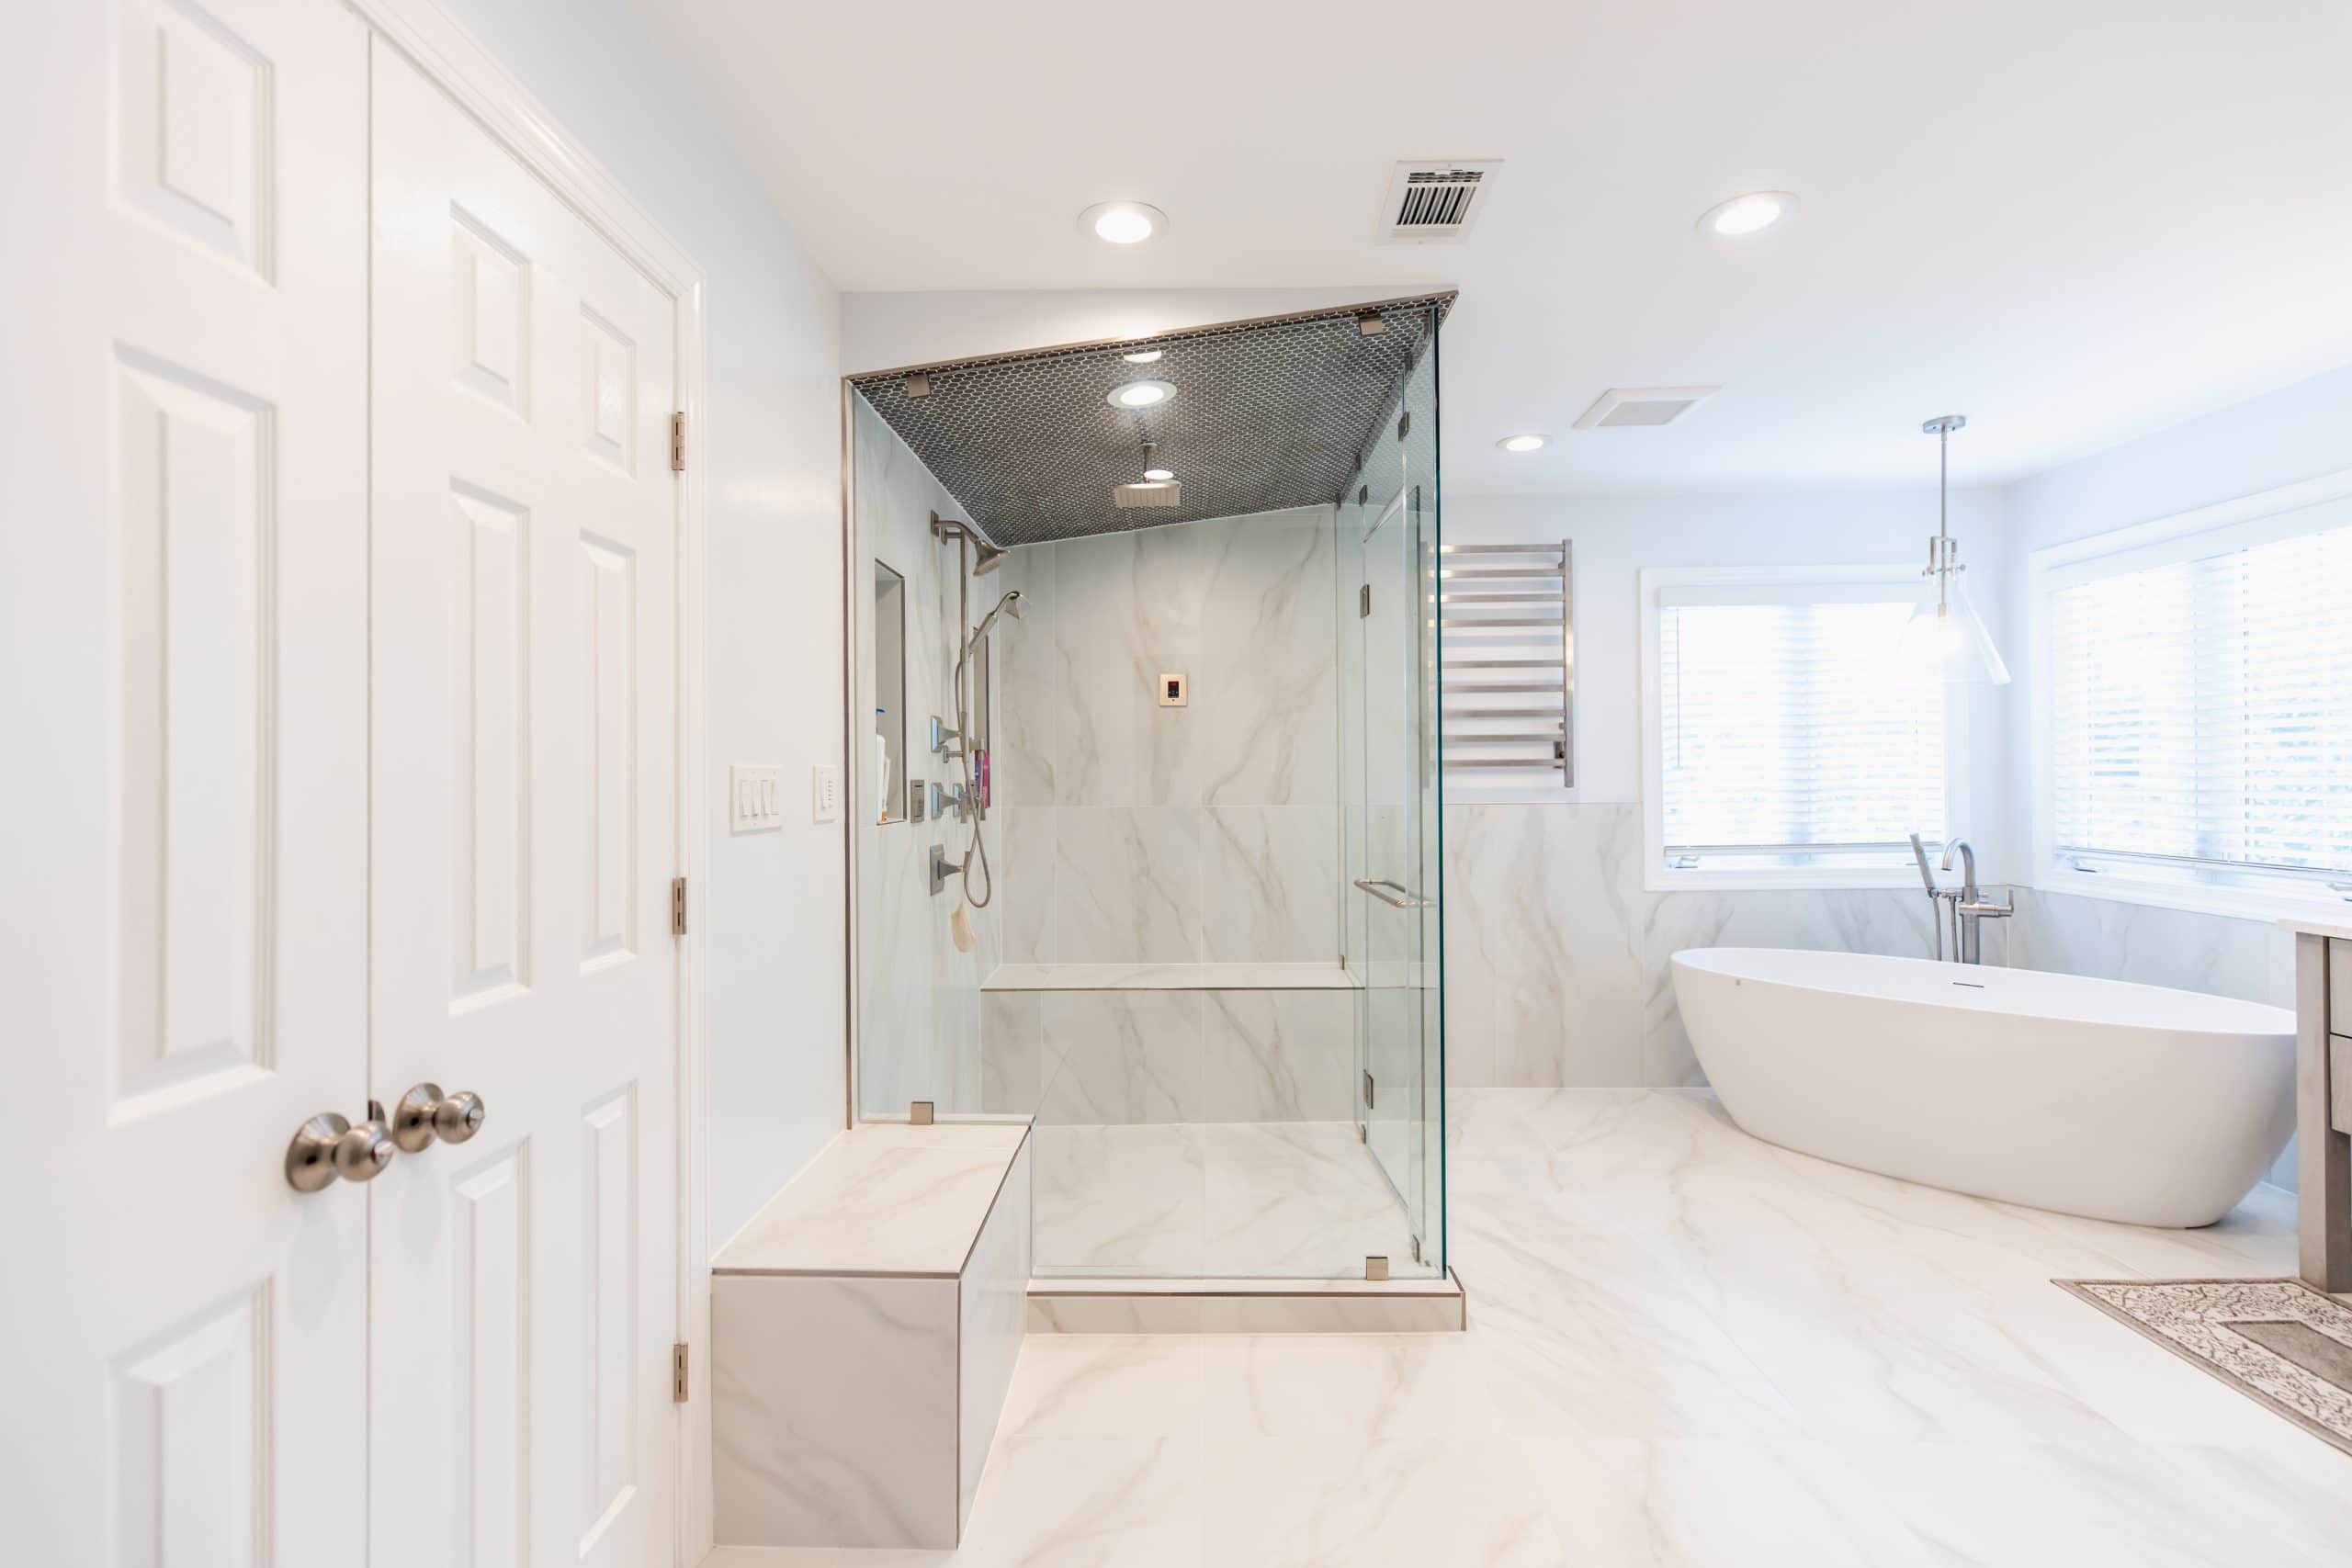 Bathroom Remodeling Length: How Long Does it Take?